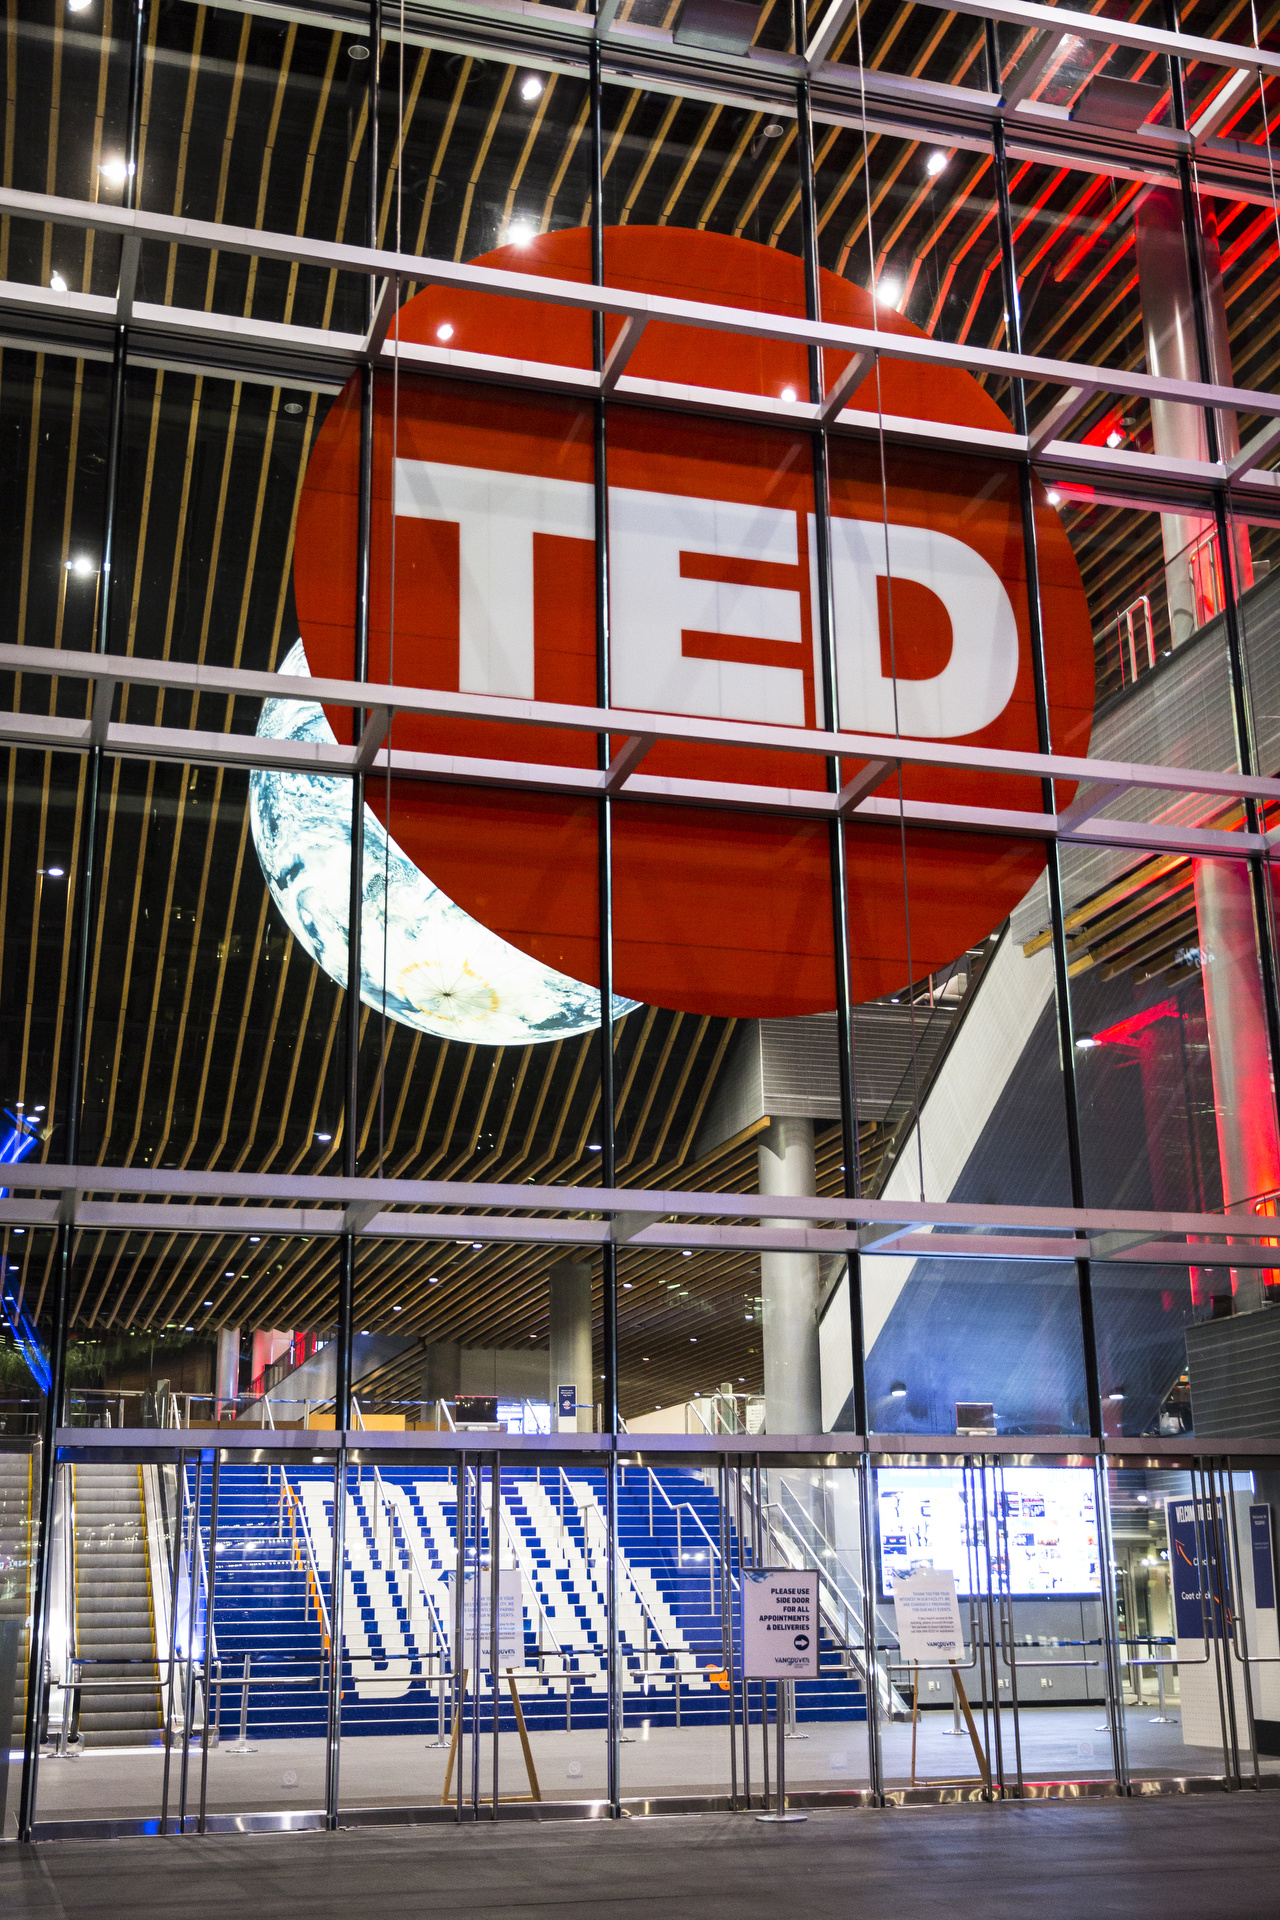 The stairs up to the TED2016 conference aim to inspire dreams. Photo: Marla Aufmuth / TED